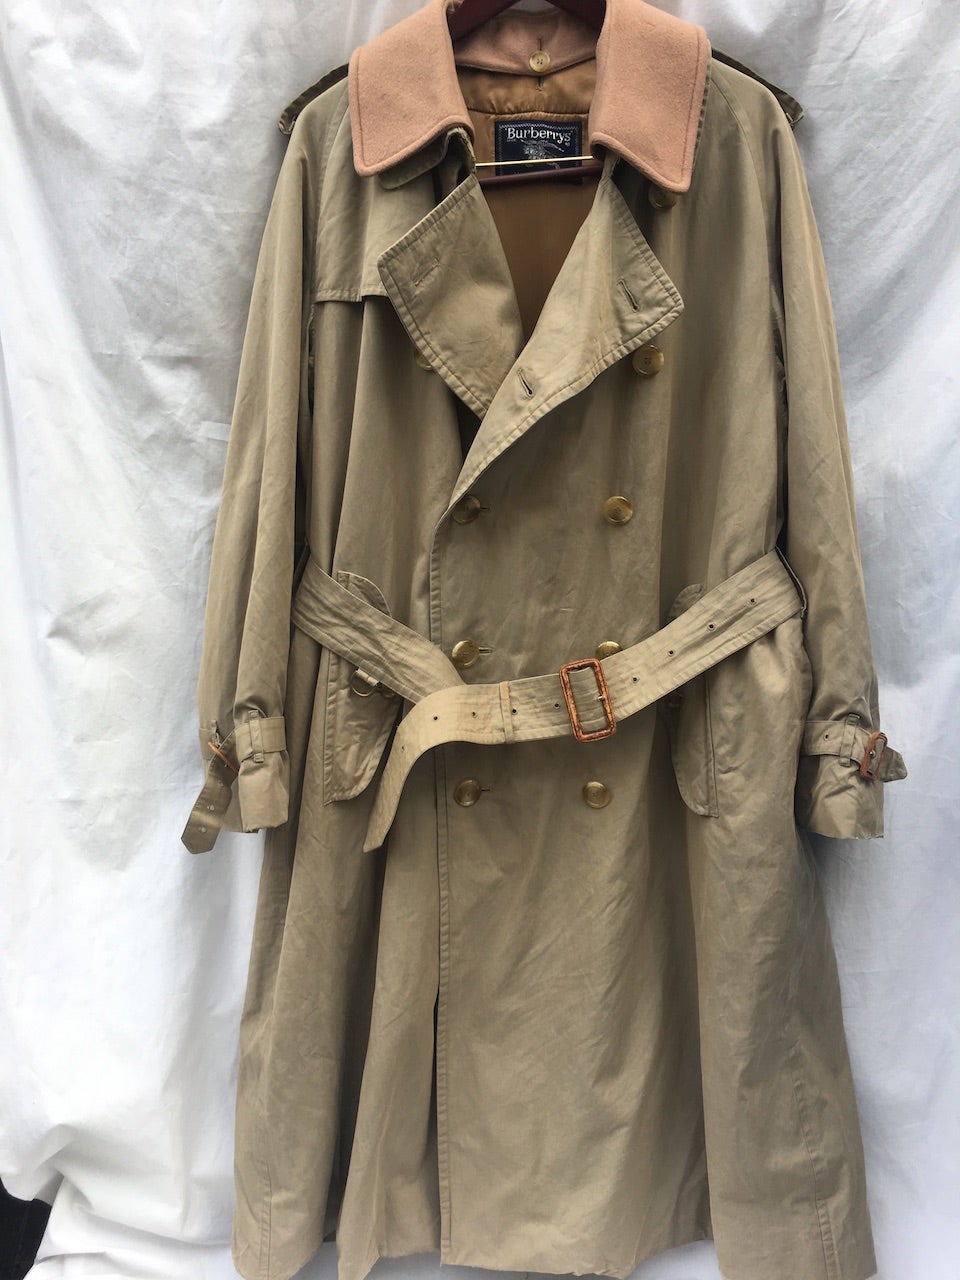 Vintage Burberrys' Trench 21 & womens rare Model